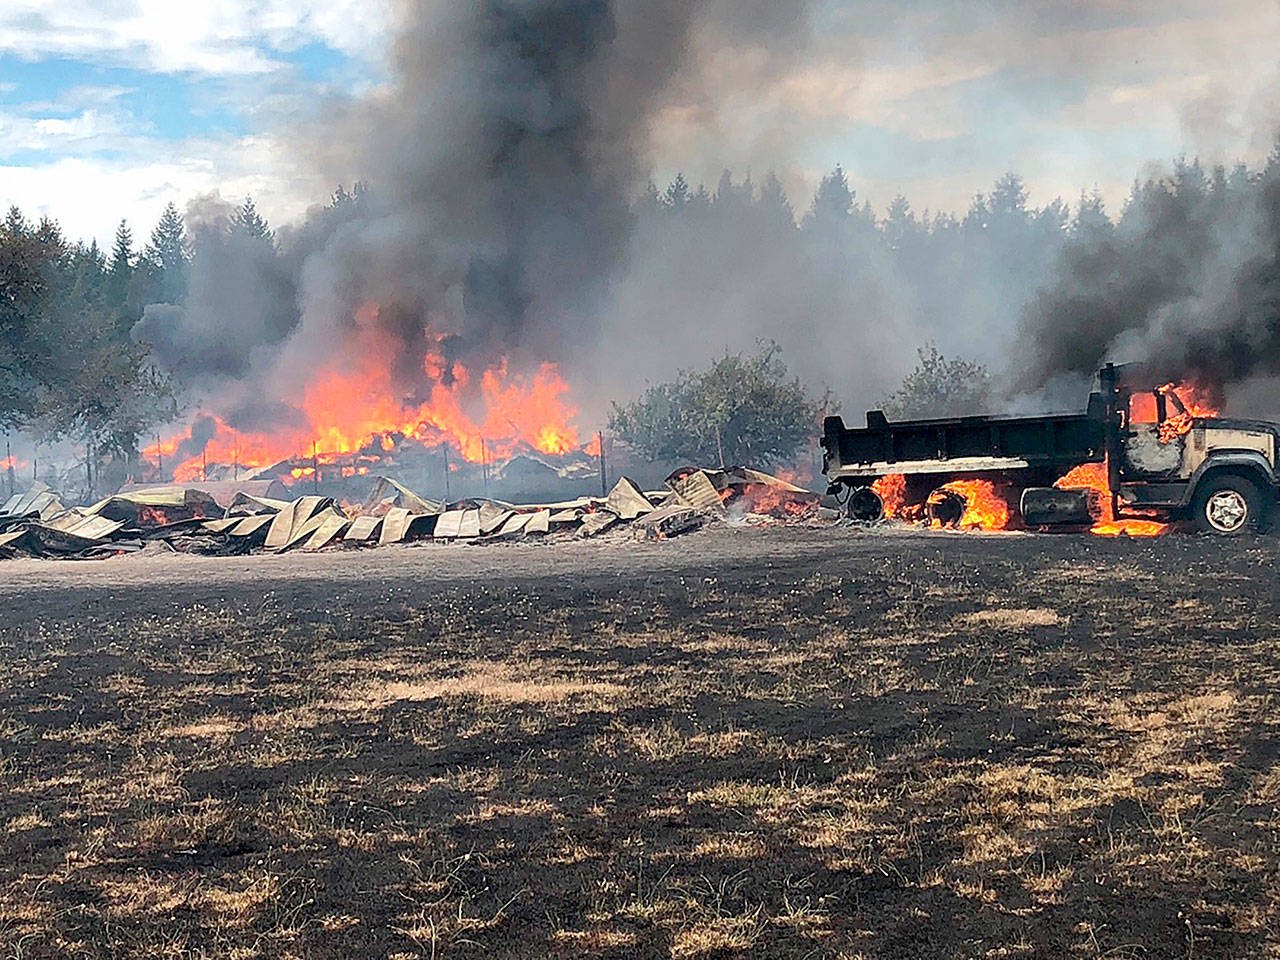 A brush fire in Buckley last summer destroyed two barns, a mobile home, two cars, a dump truck, a panel truck, and other buildings and vehicles. Photo courtesy East Pierce Fire and Rescue